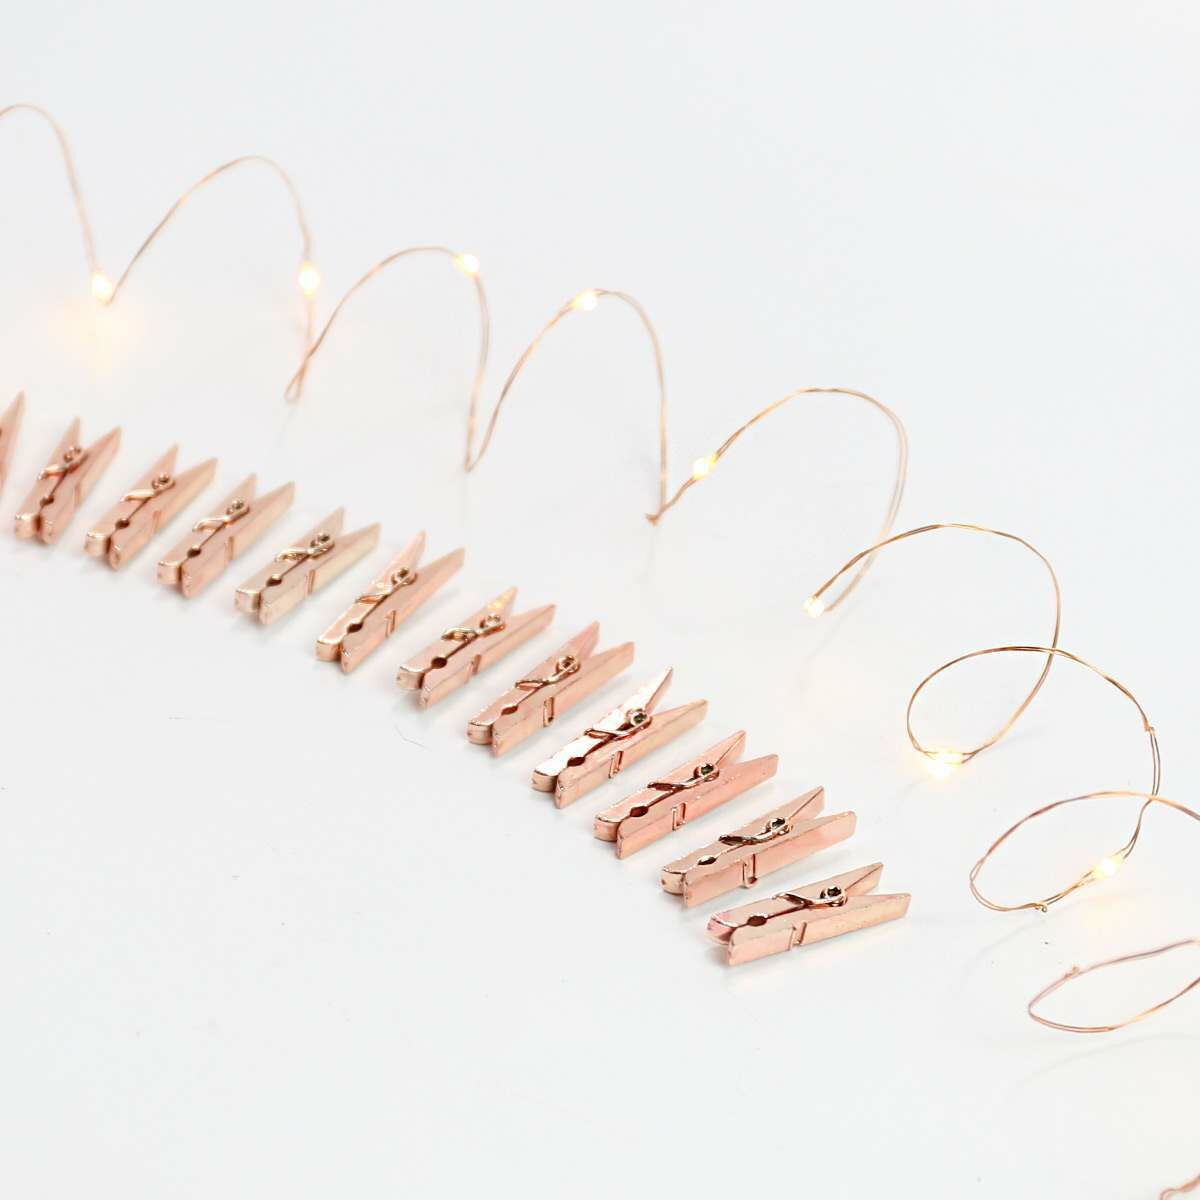 2m Battery Copper Firefly Wire Peg Fairy Lights, 20 Warm White LEDs image 6